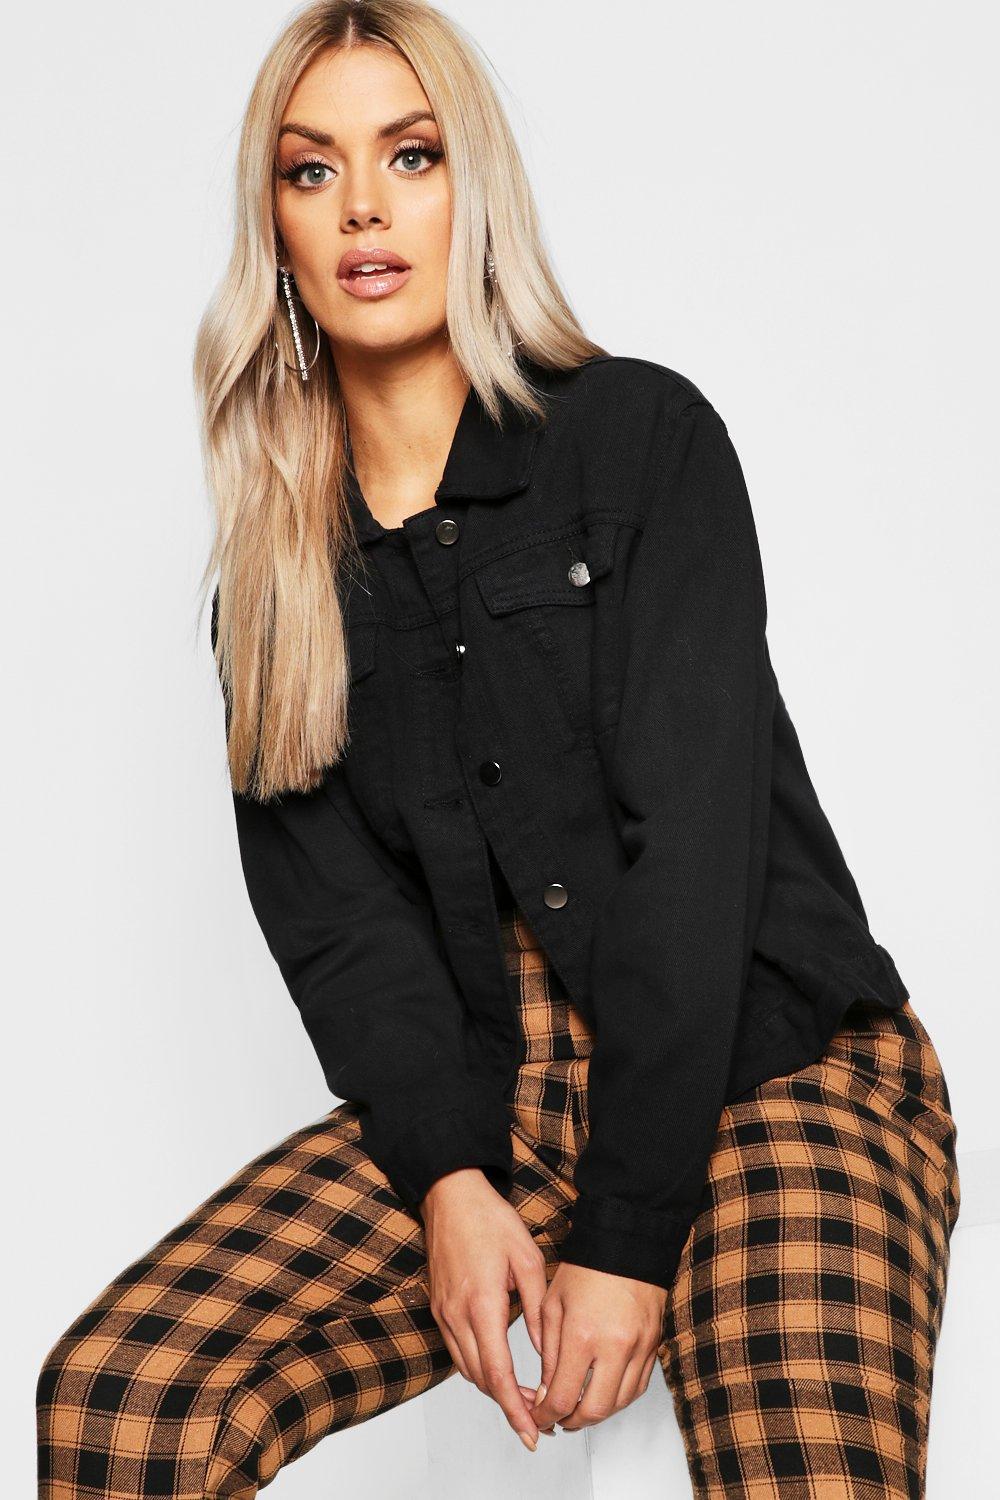 Black Denim Jacket on Blonde Woman in Front of Checkered Background